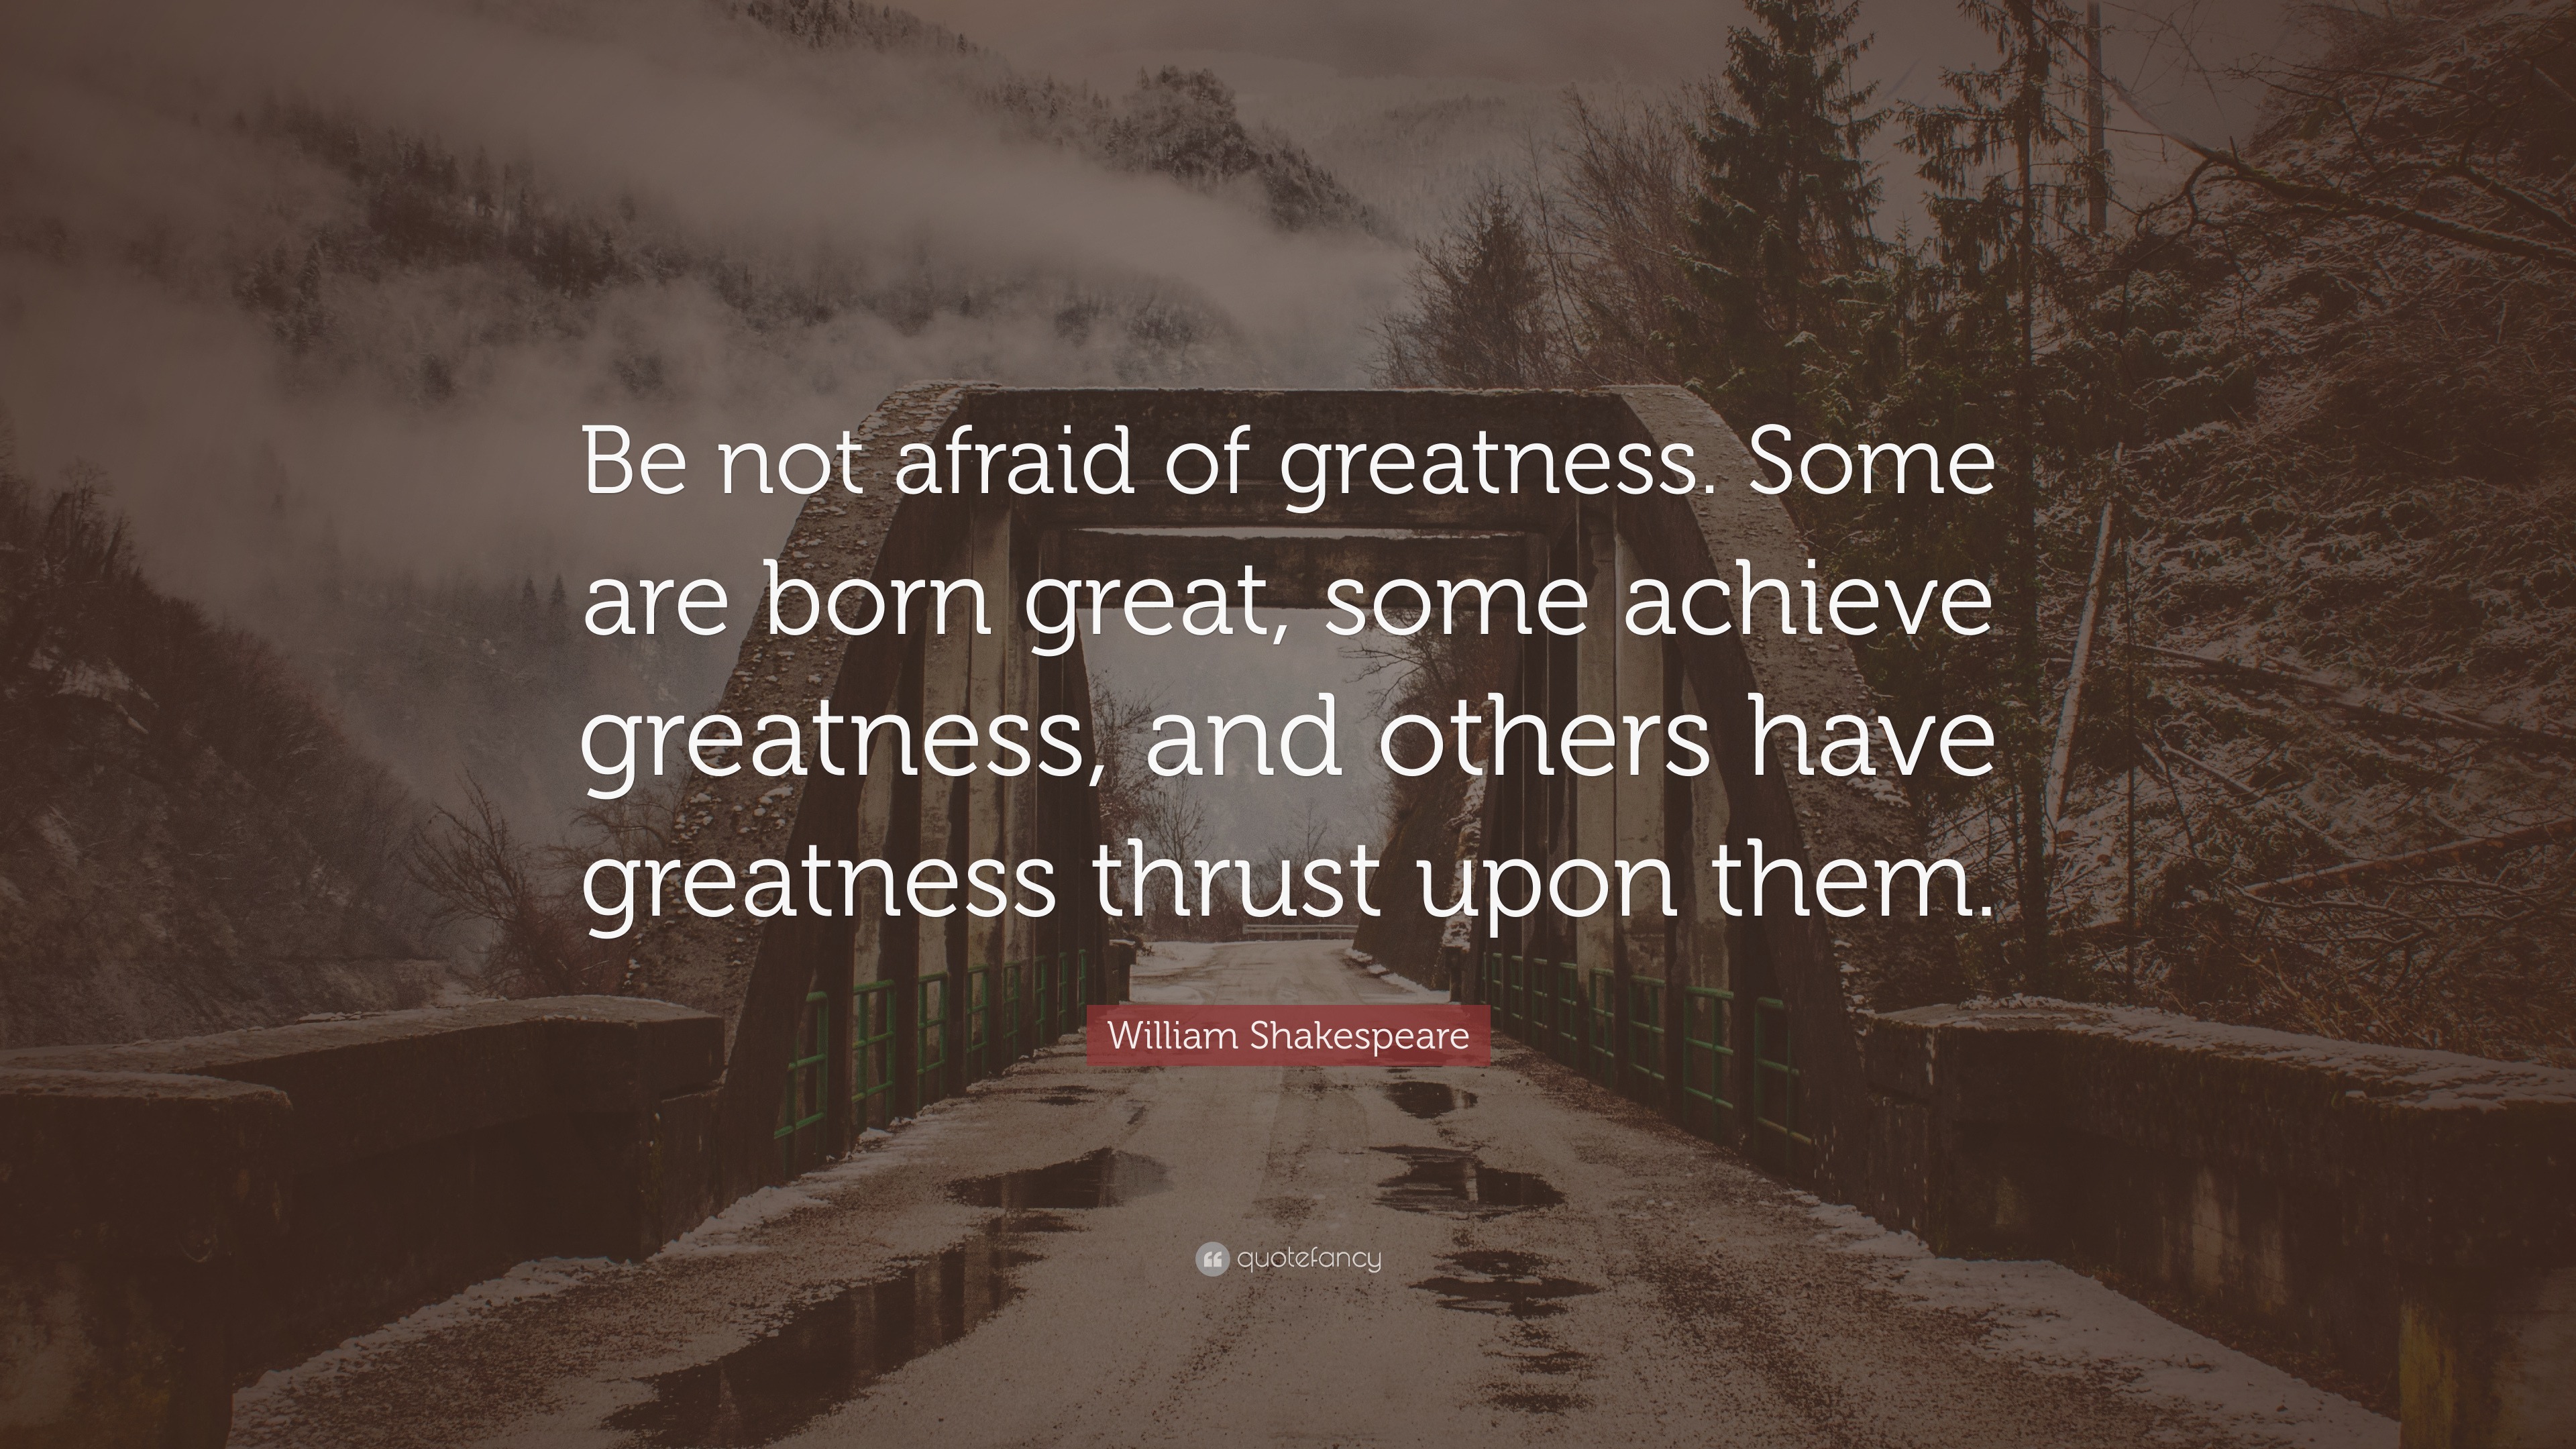 William Shakespeare Quote “Be not afraid of greatness